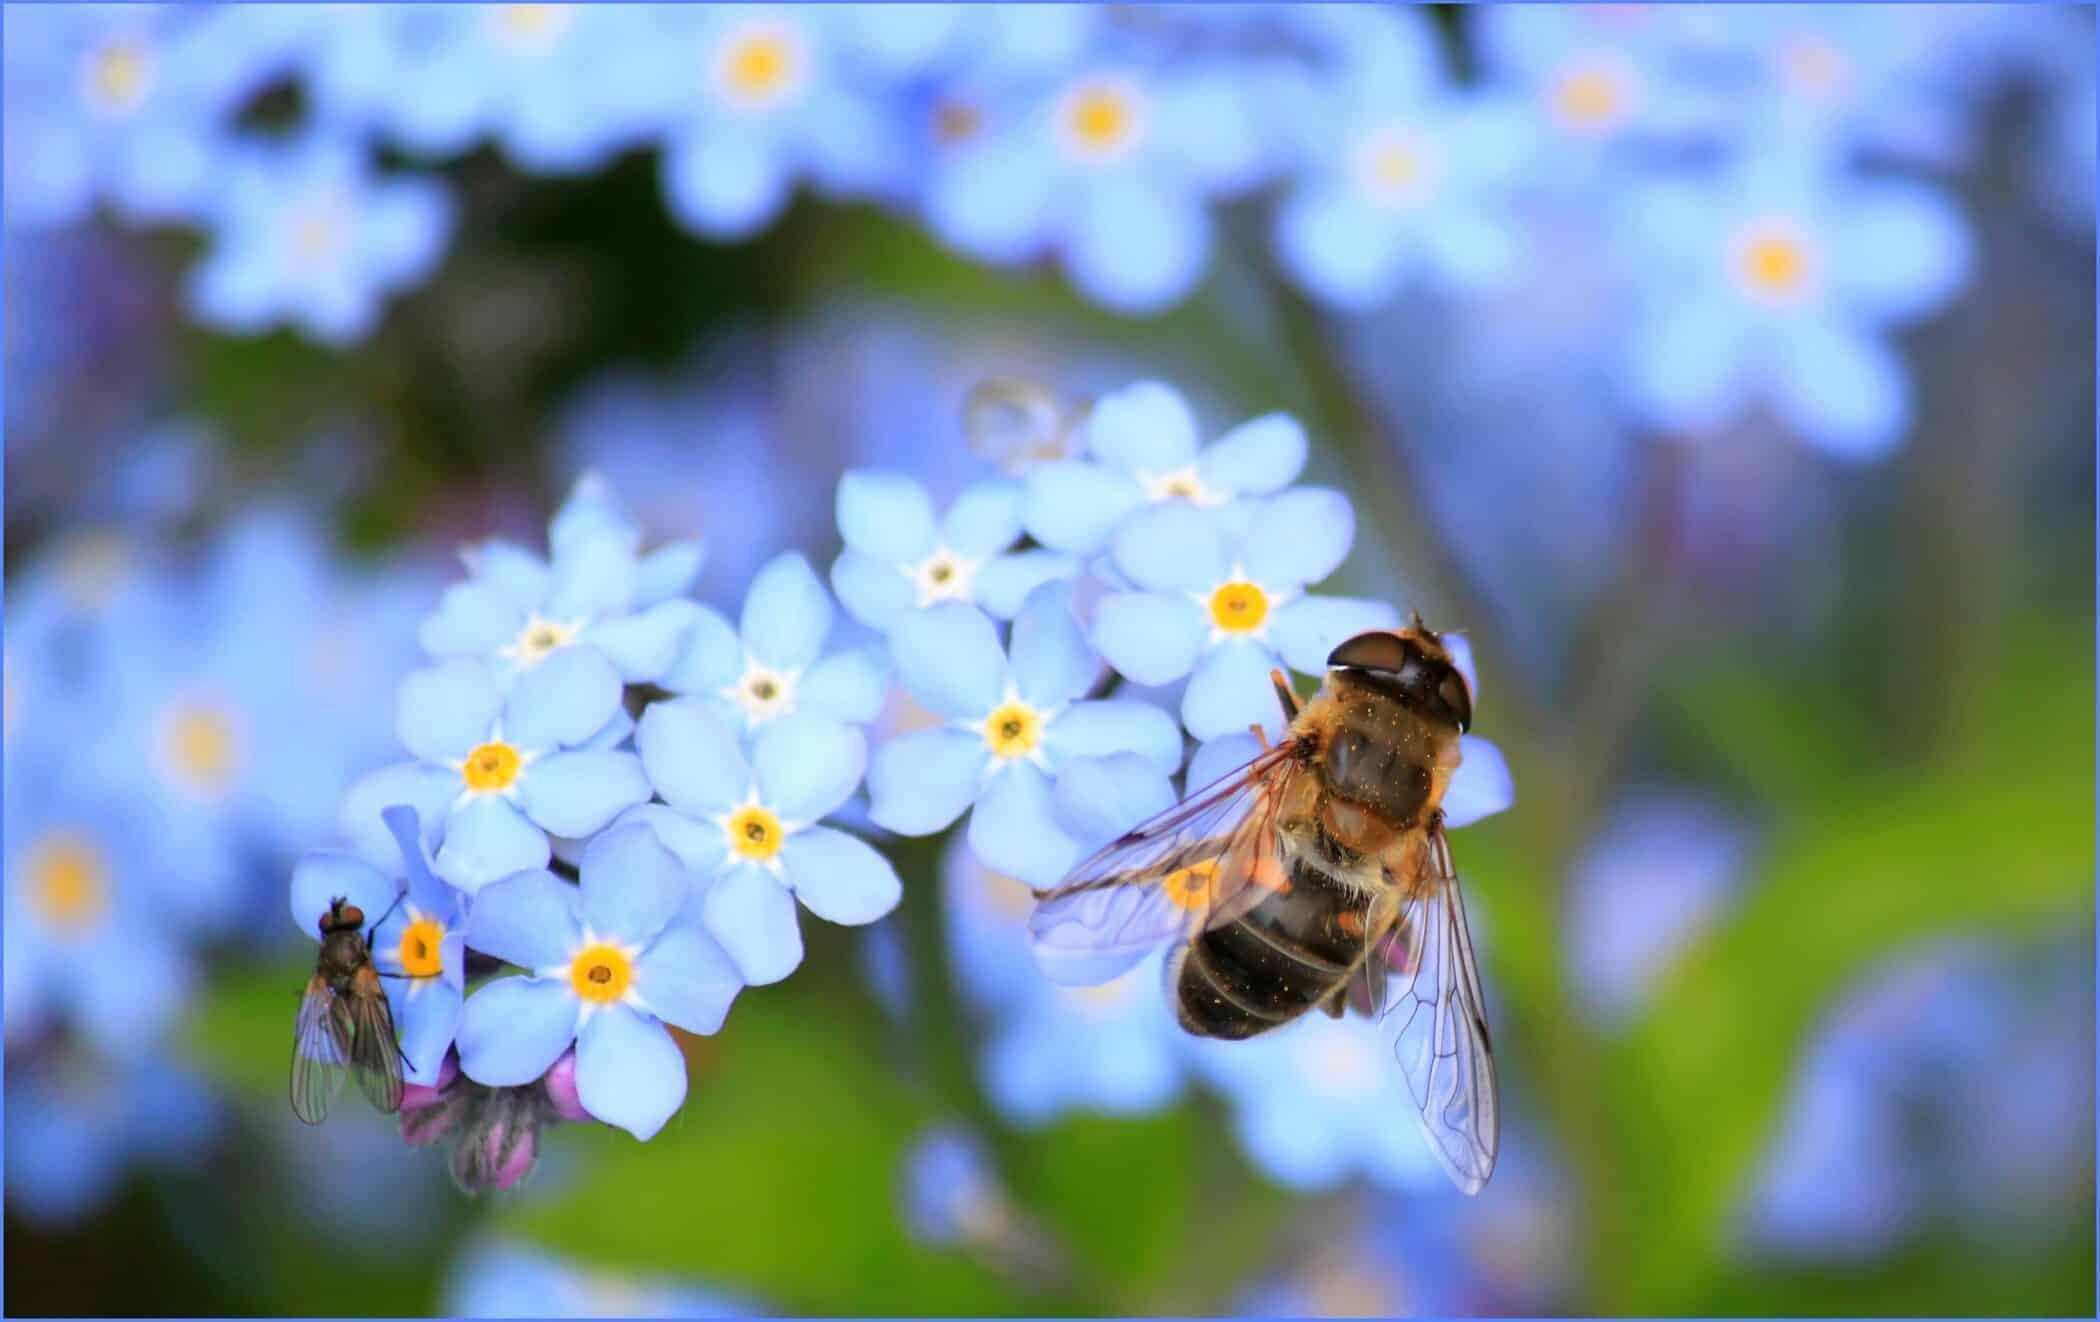 Forget me not flower with a bee